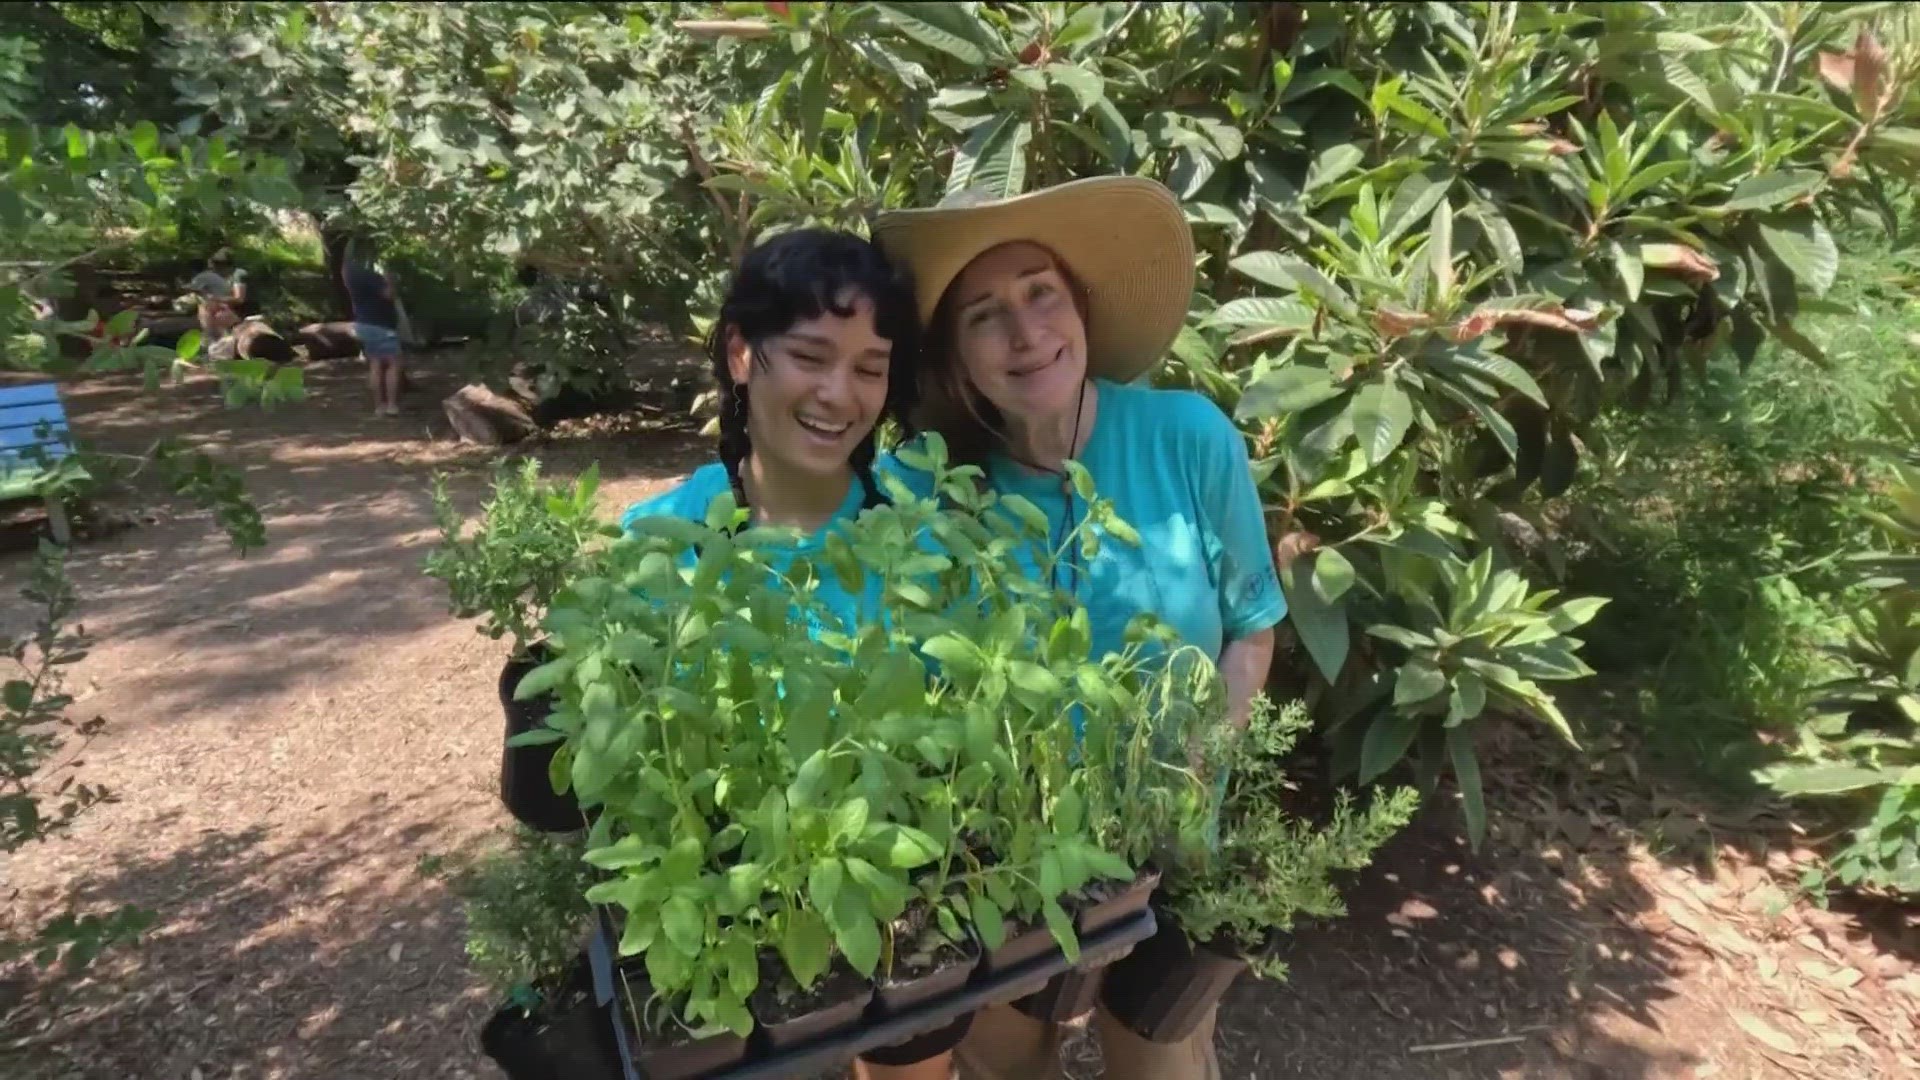 KVUE's Grace Thornton spoke with a group of volunteers who are working to ensure green space, community and food security stay at the forefront of Austin's growth.